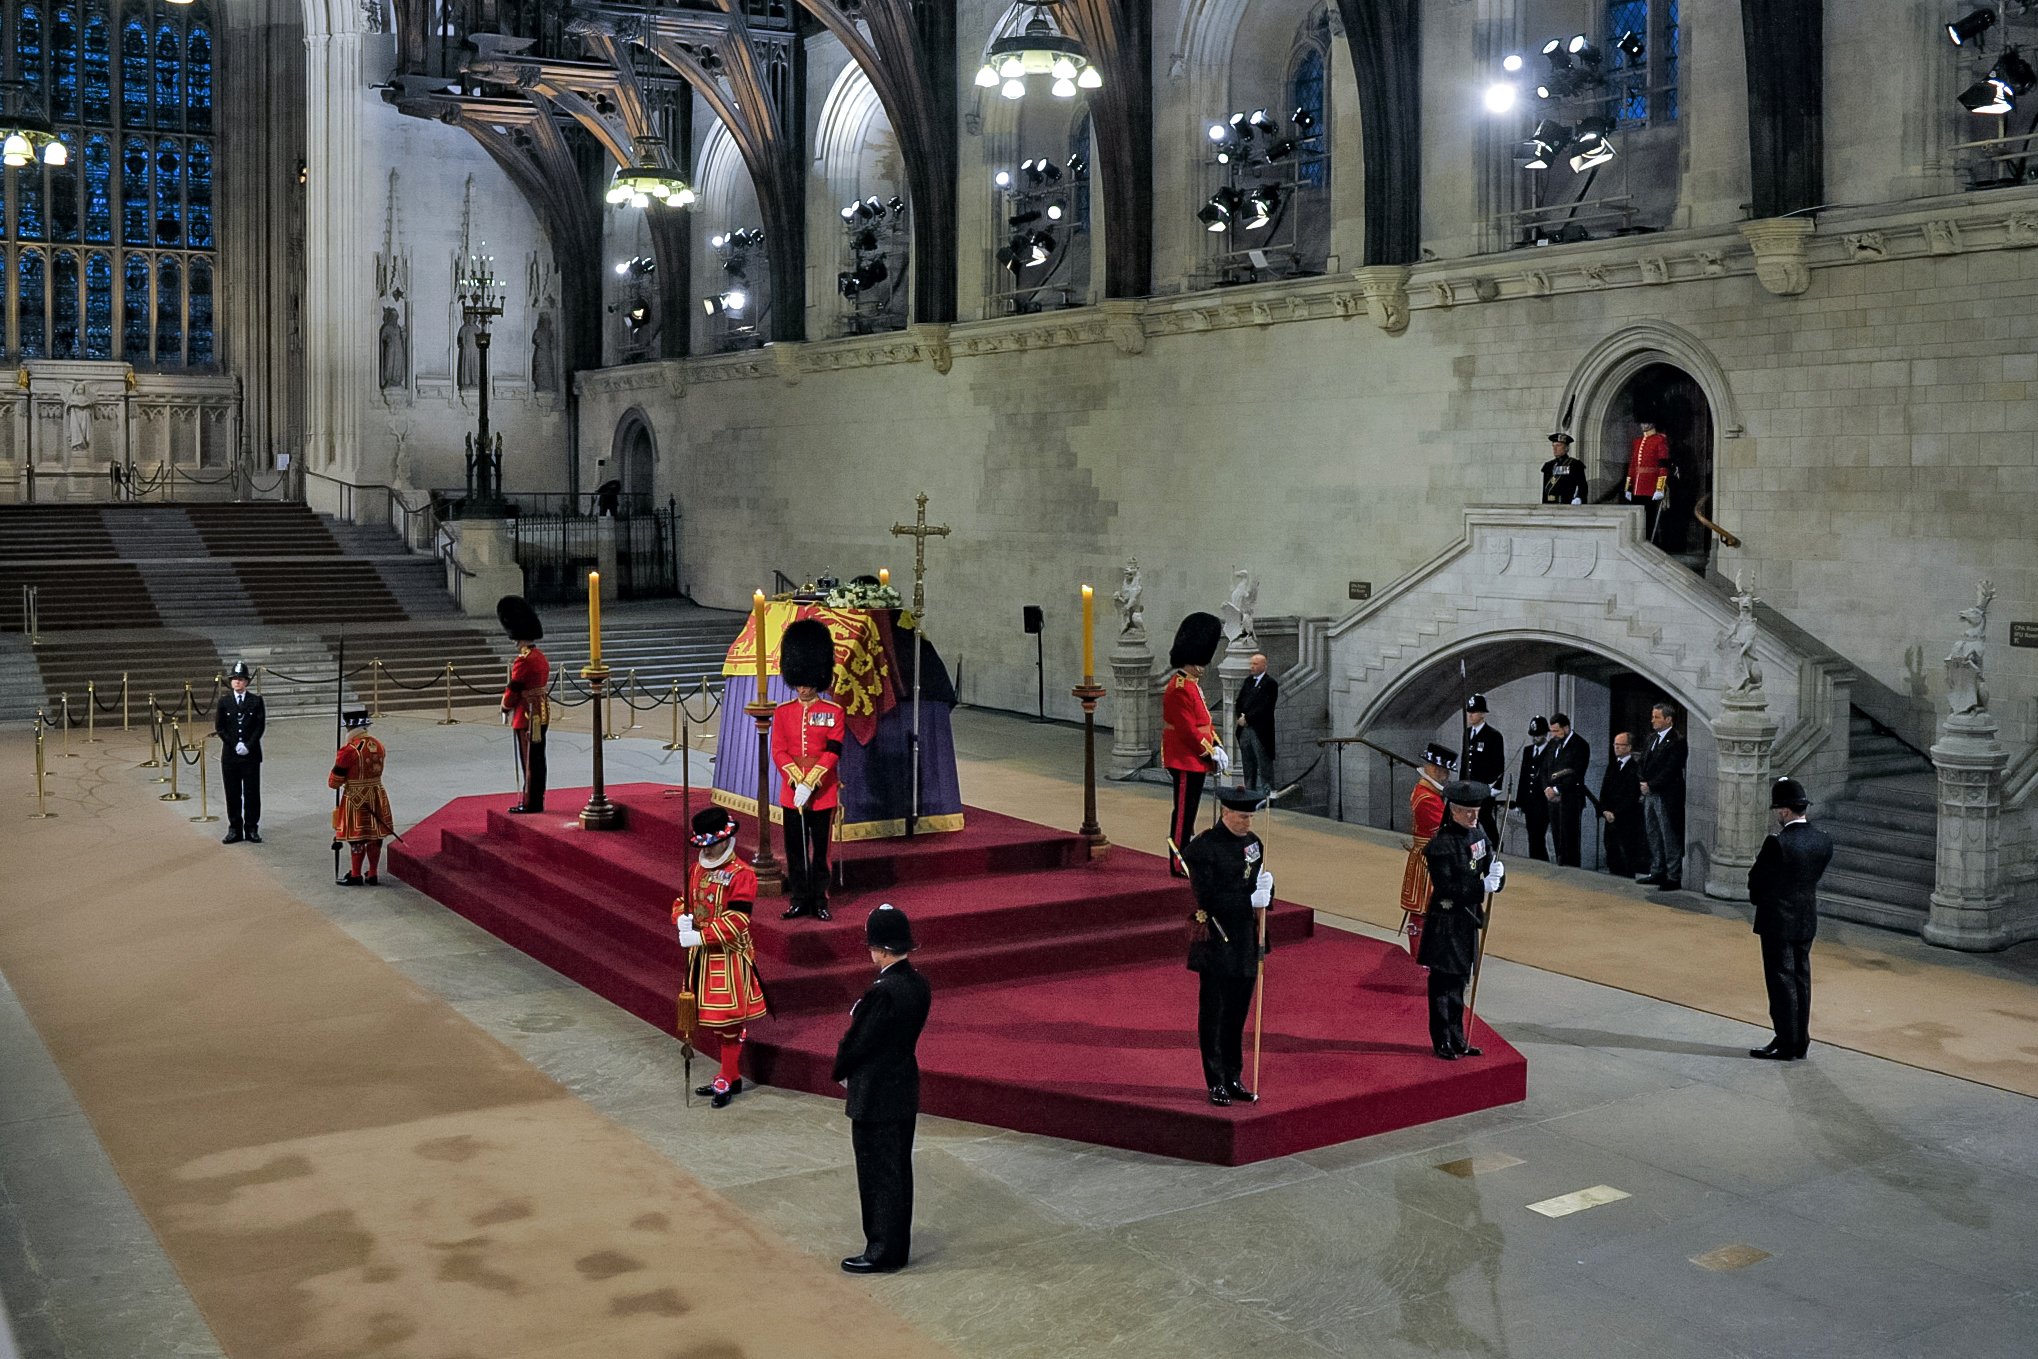 Queen Elizabeth II's coffin at her state funeral in Westminster 2022. | Source: Getty Images 